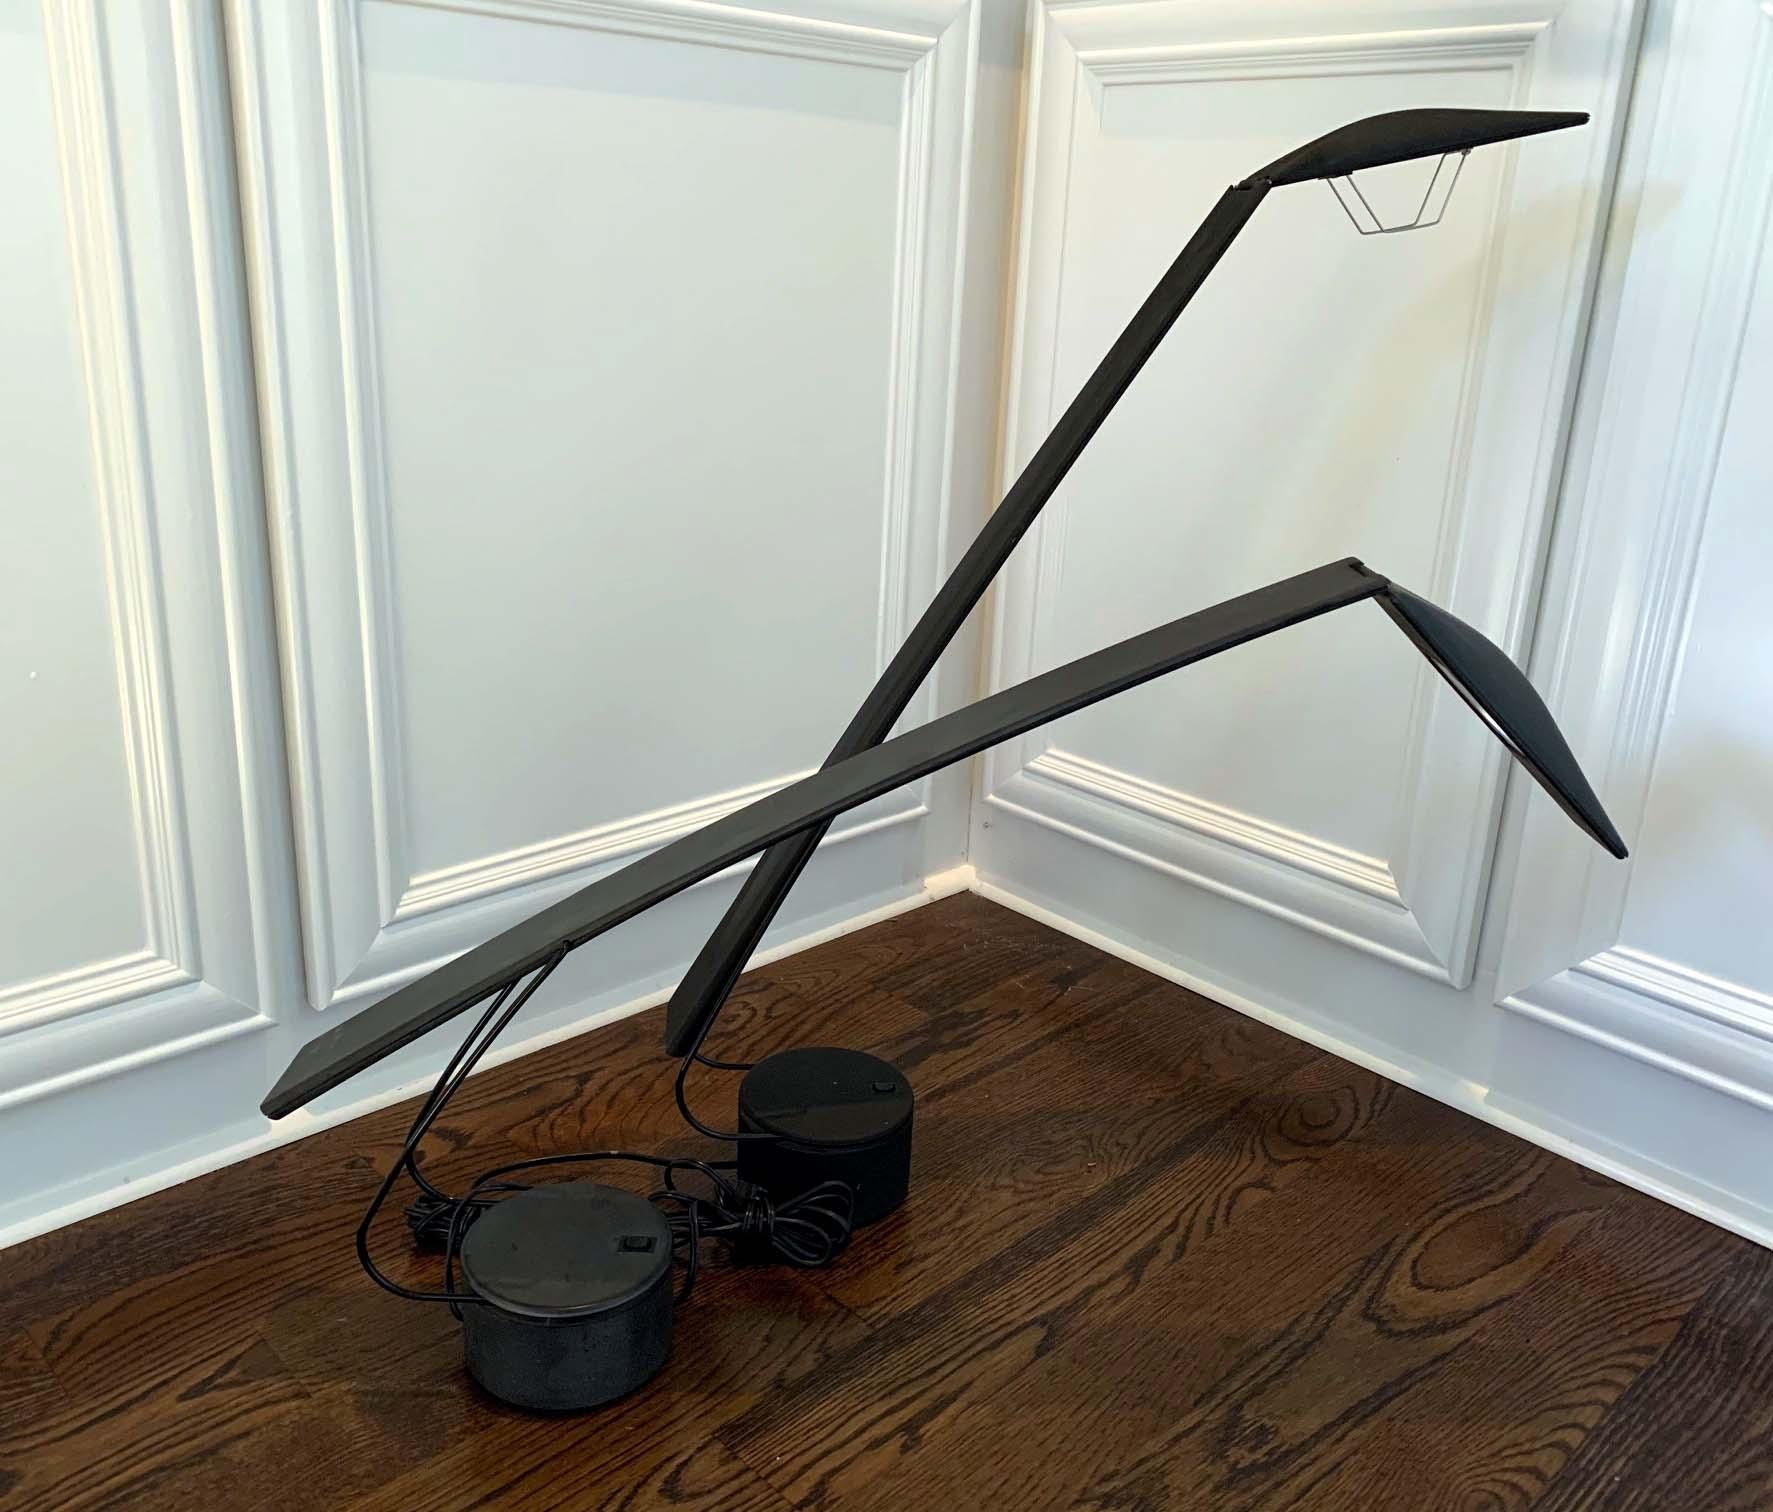 Metal Dove Task Desk Lamps by Mario Barbaglia Marco Colombo for PAF Studio Italy, Pair For Sale